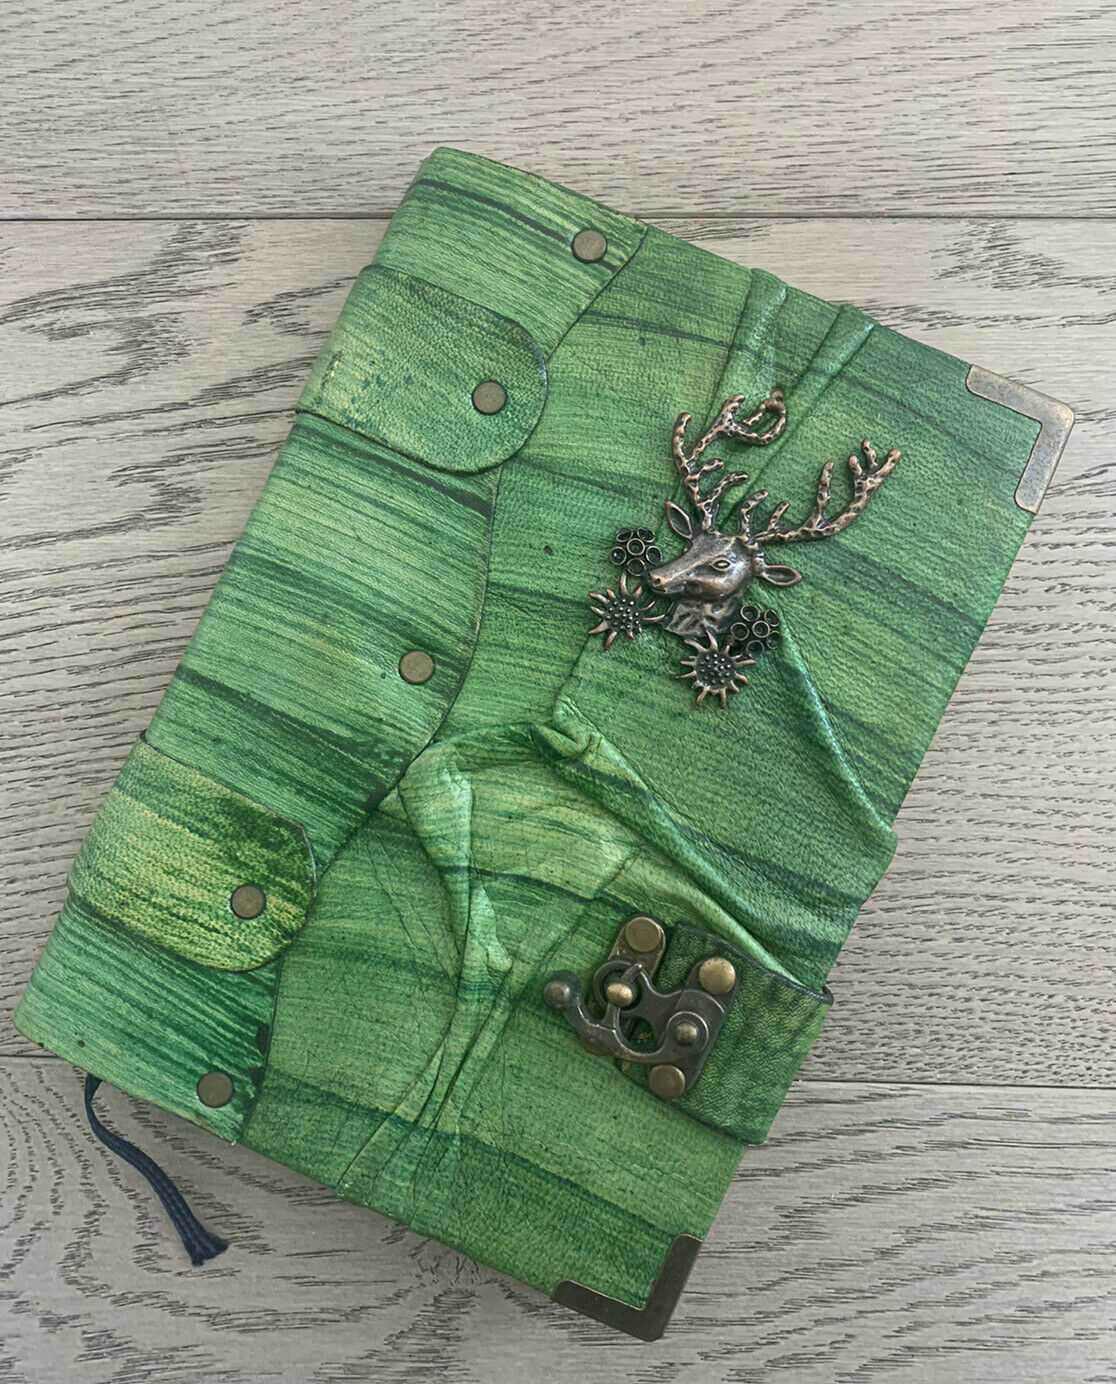 Primary image for Belt Strap Leather Journal Handmade Notebook Diary Dear Design Green Large